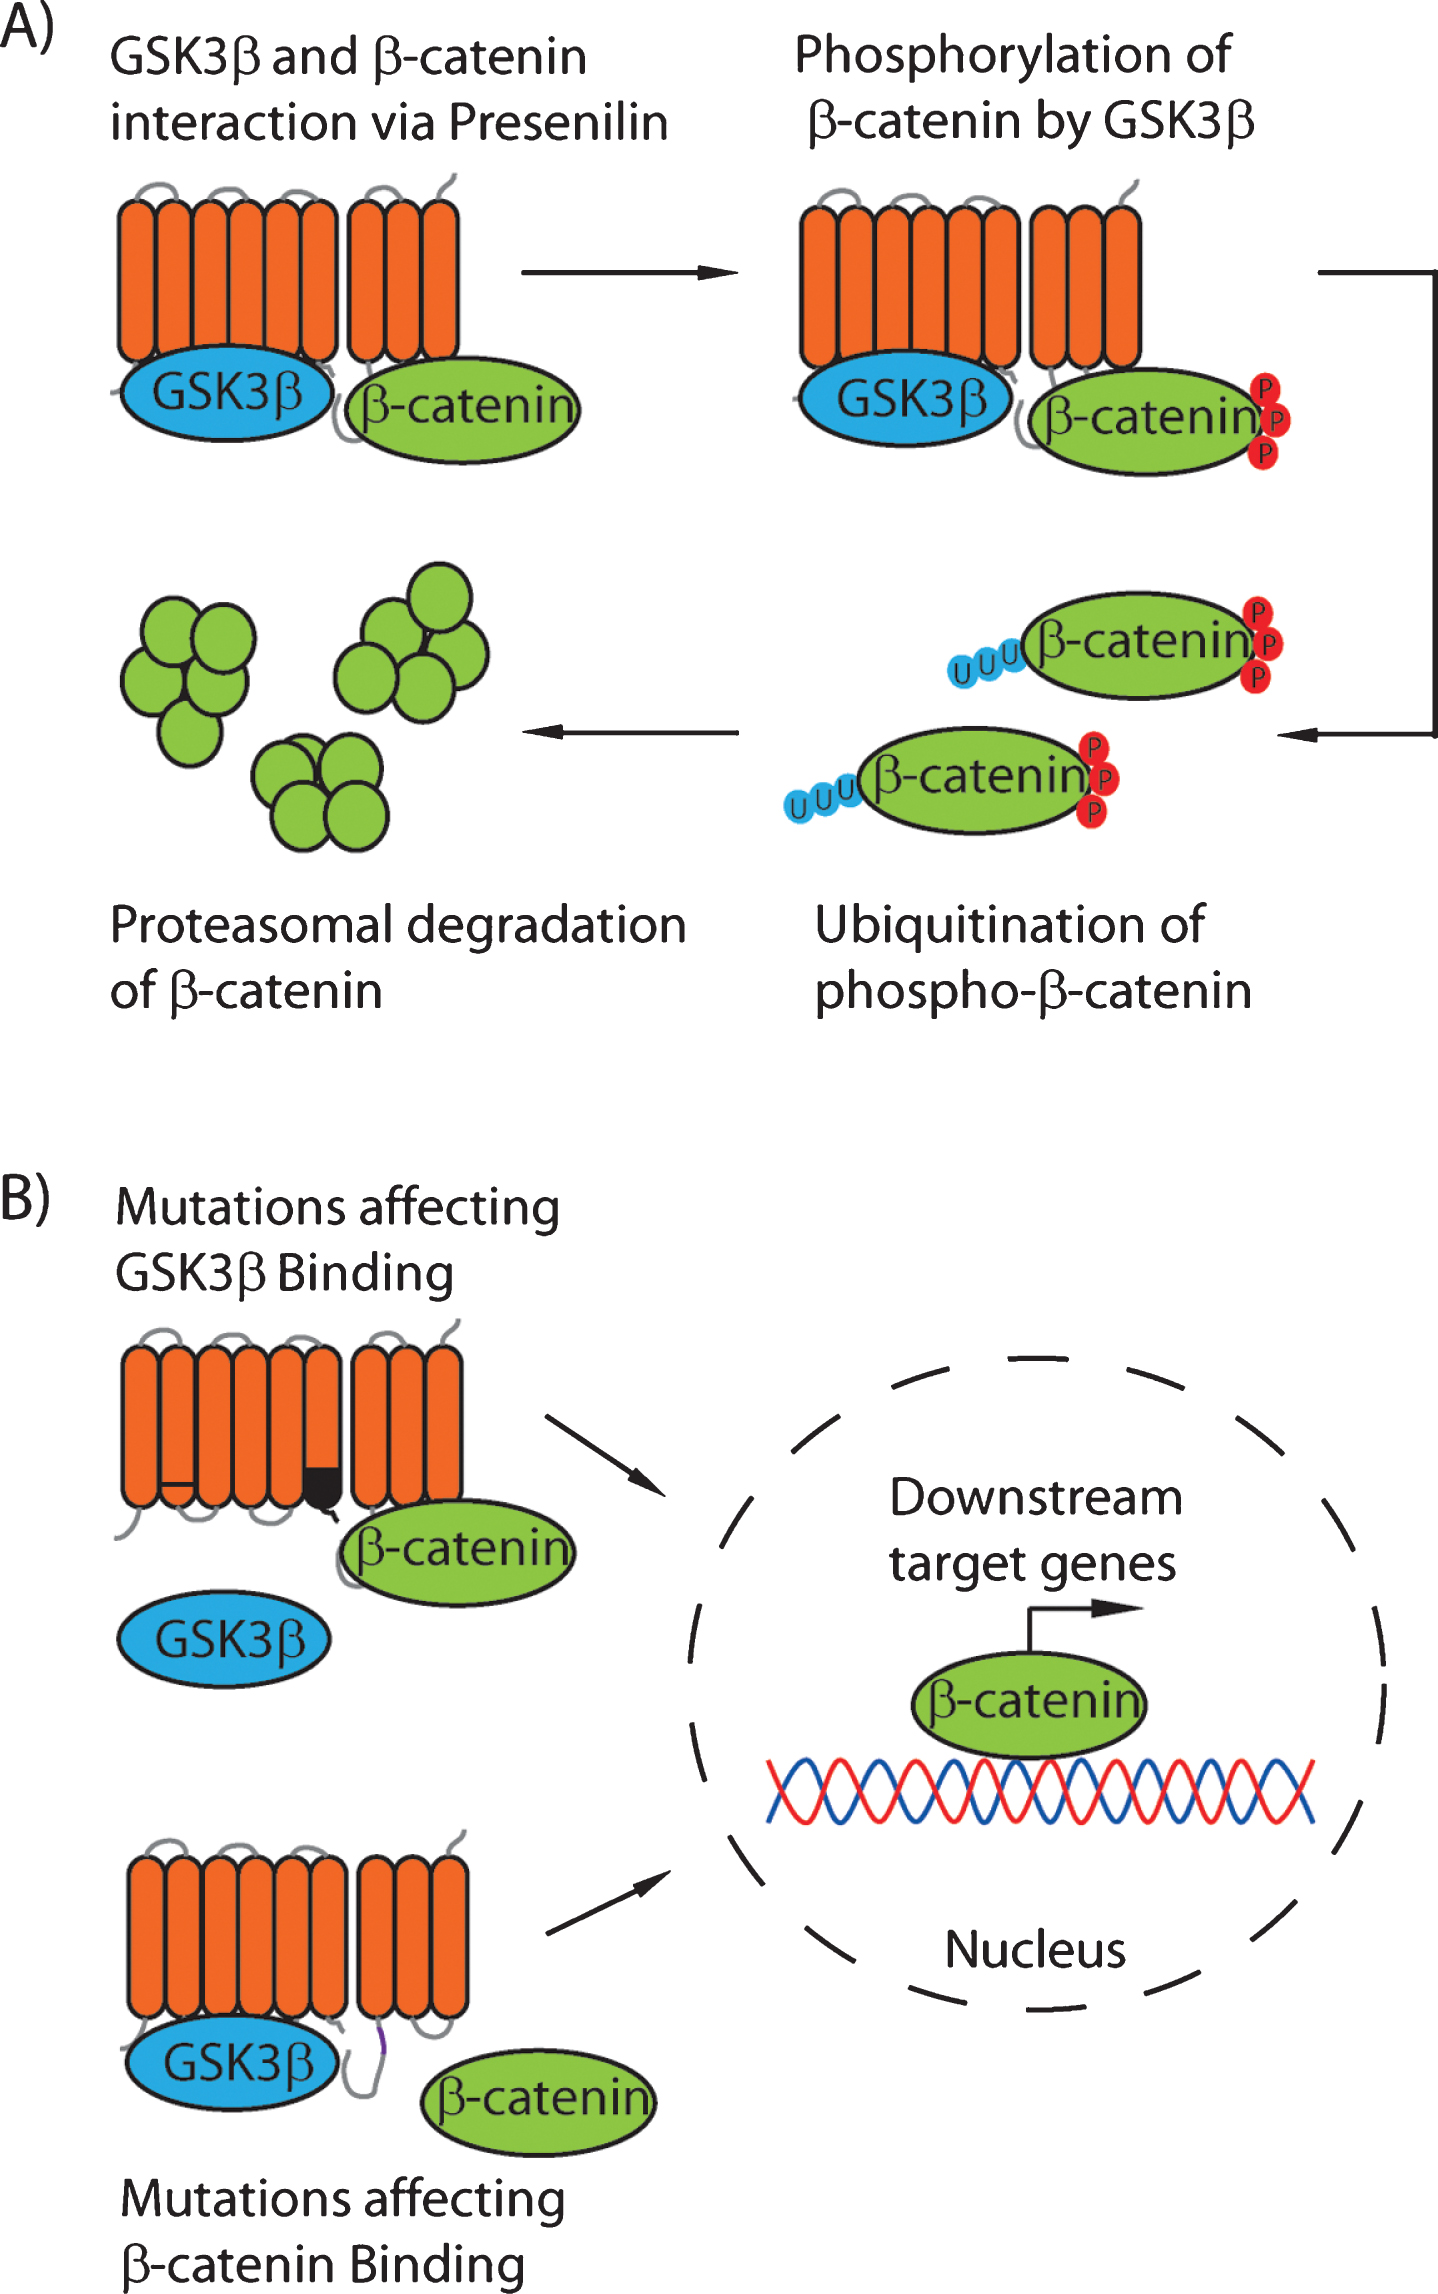 A proposed model for the scaffolding role of the presenilin proteins. Under normal conditions (A), GSK3β binds to the Psen1 N-terminal fragment in the cytoplasmic loop (residues 250–290) and β-catenin binds to the C-terminal fragment (residues 330–360). This binding results in the phosphorylation of β-catenin at S33/S37/T41 by GSK3β, and therefore increased turnover of β-catenin. B) Mutations in Psen1 affecting binding of either GSK3β or β-catenin reduce the phosphorylation, and therefore ubiquitination, of β-catenin, leading to increased levels of nuclear β-catenin and enhanced β-catenin-dependent signaling.